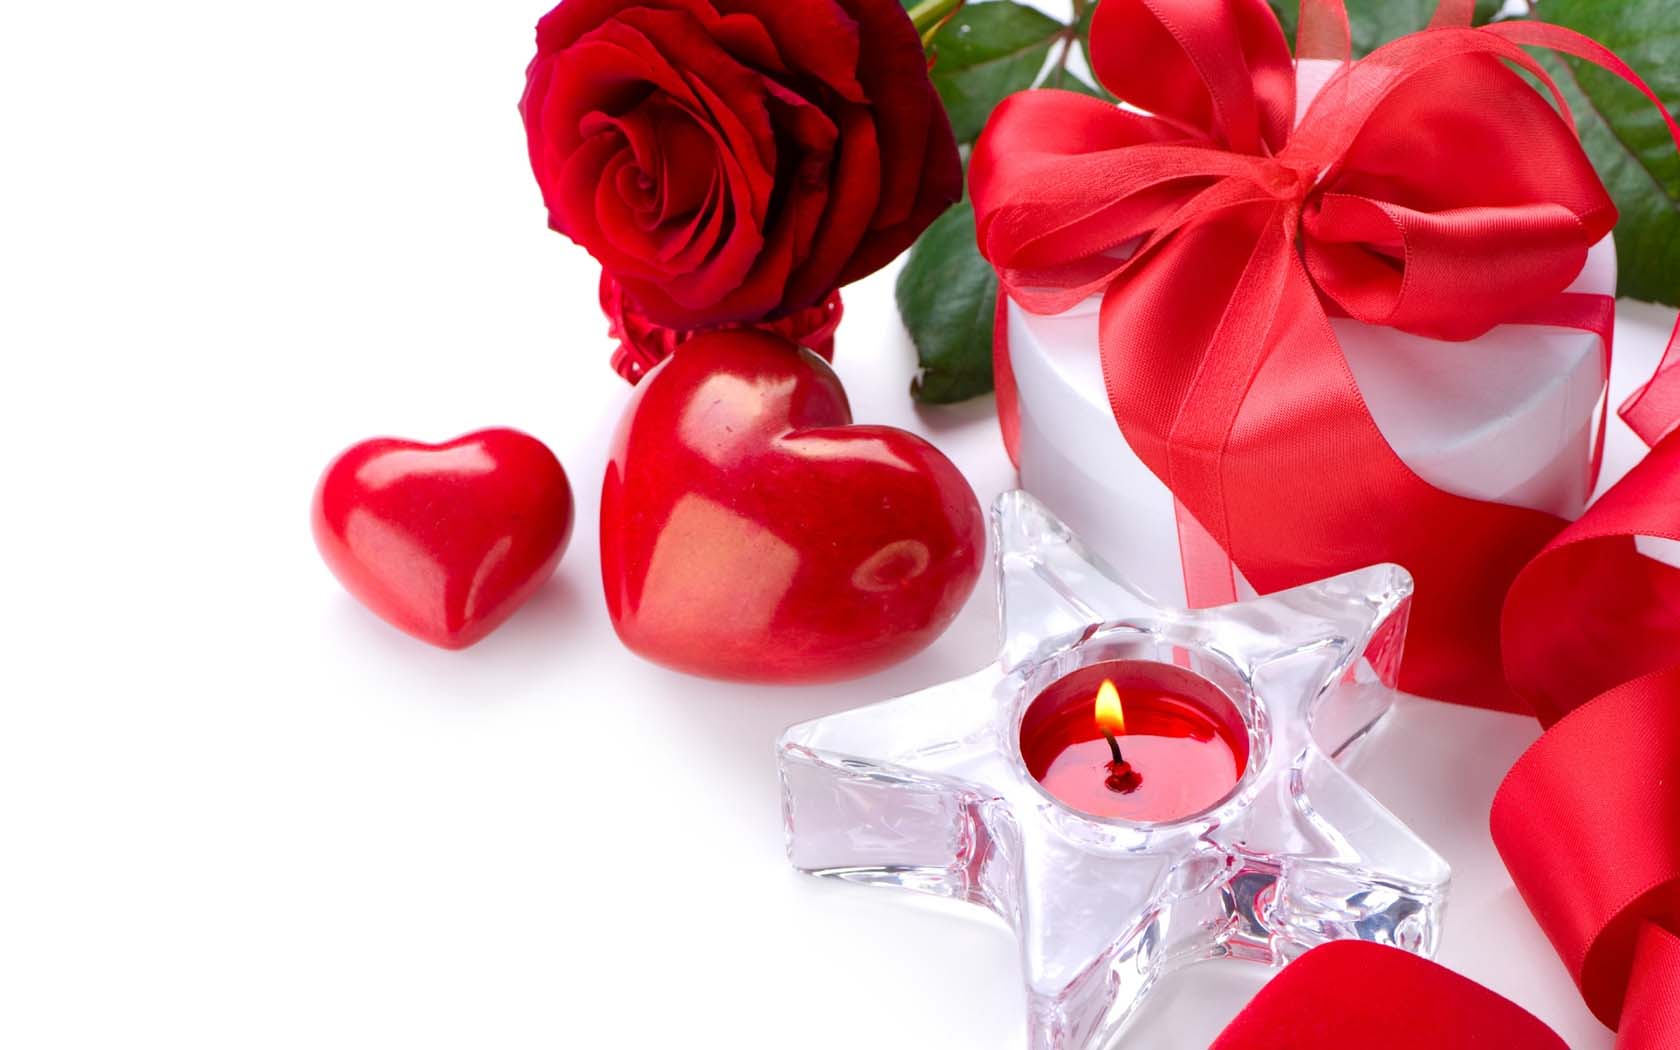 Love Rose Flower Ribbon Gift Candle Heart Romance 1680x1050